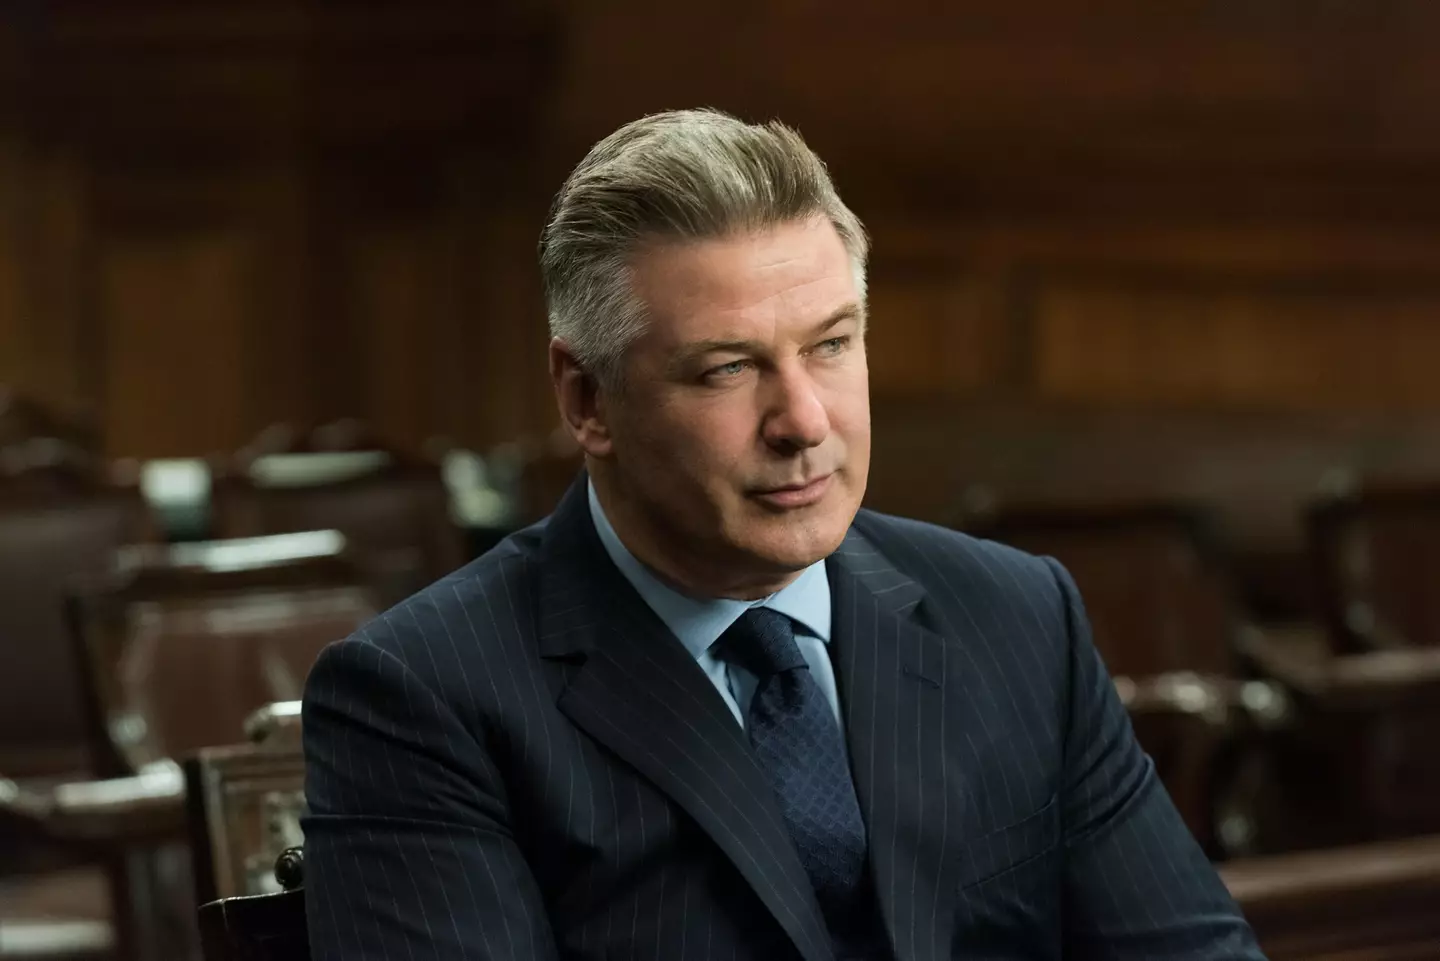 Alec Baldwin has been sued for at least $25 million by the sister and widow of a man killed in Kabul.